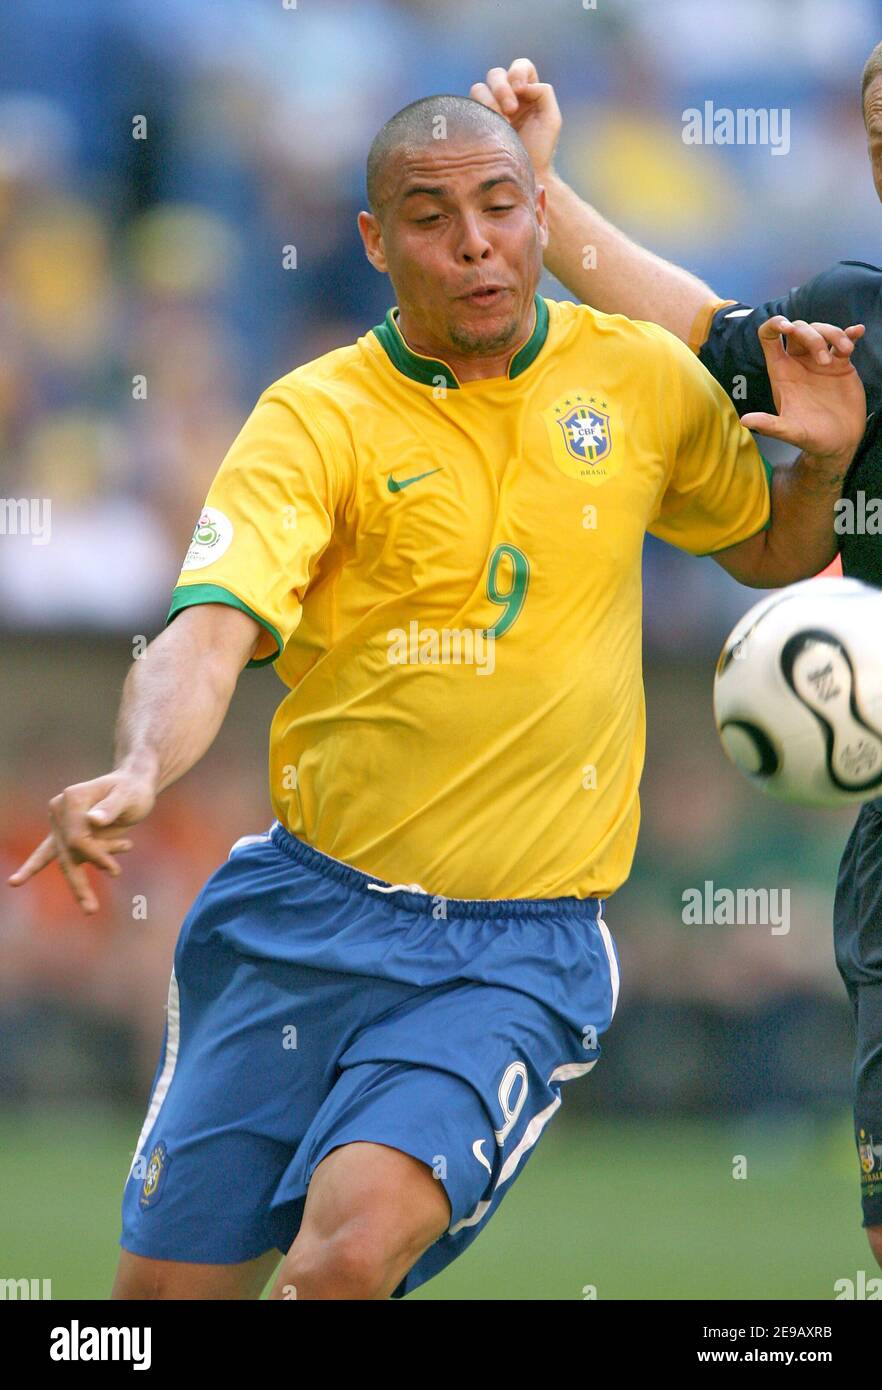 Brazil's Ronaldo during the World Cup 2006, Group F, Brazil vs Australia at the Allianz-Arena stadium in Munich, Germany on Une 18, 2006. Brazil won 2-0. Photo by Gouhier-Hahn-Orban/Cameleon/ABACAPRESS.COM Stock Photo